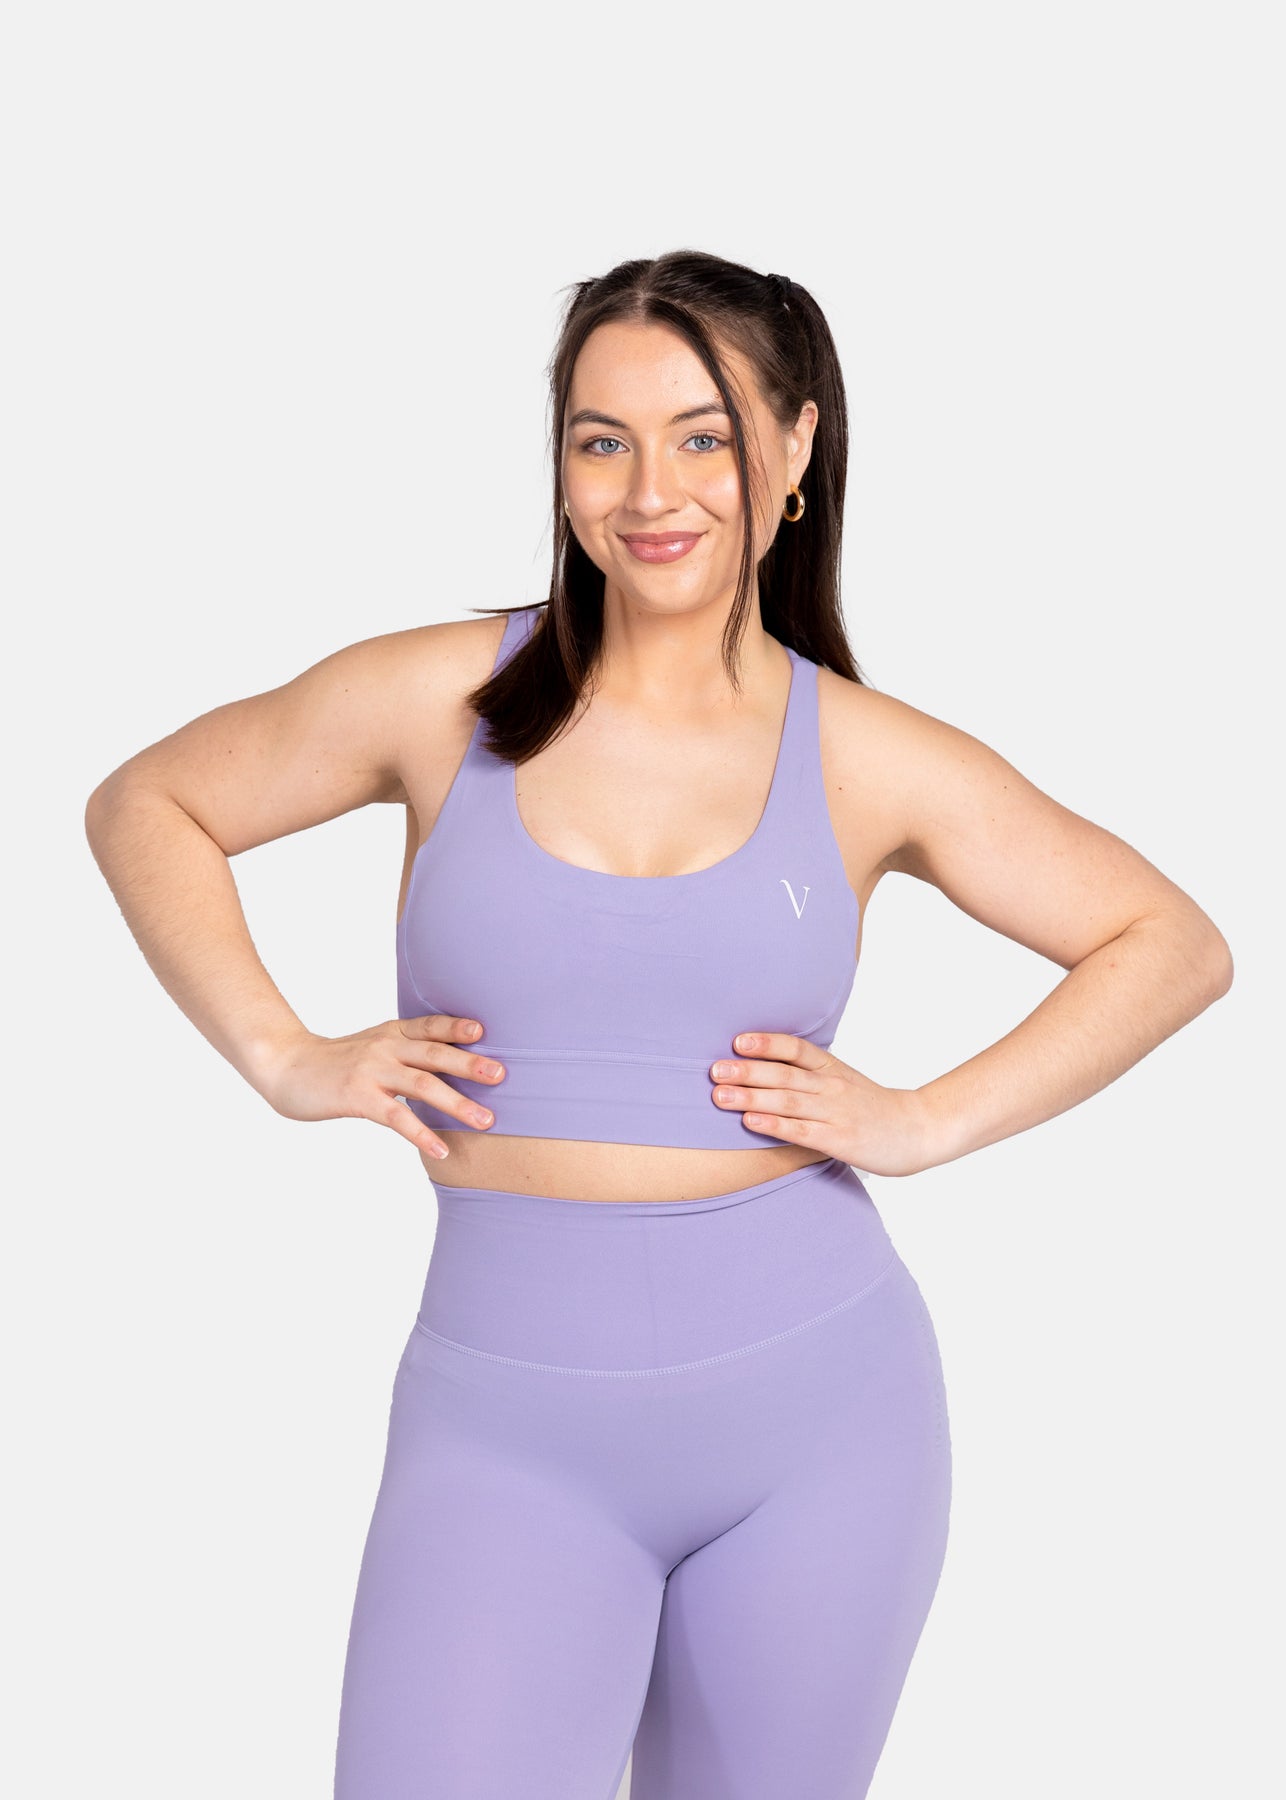 Extra 25% Off Select Styles Purple Volleyball Sports Bras.